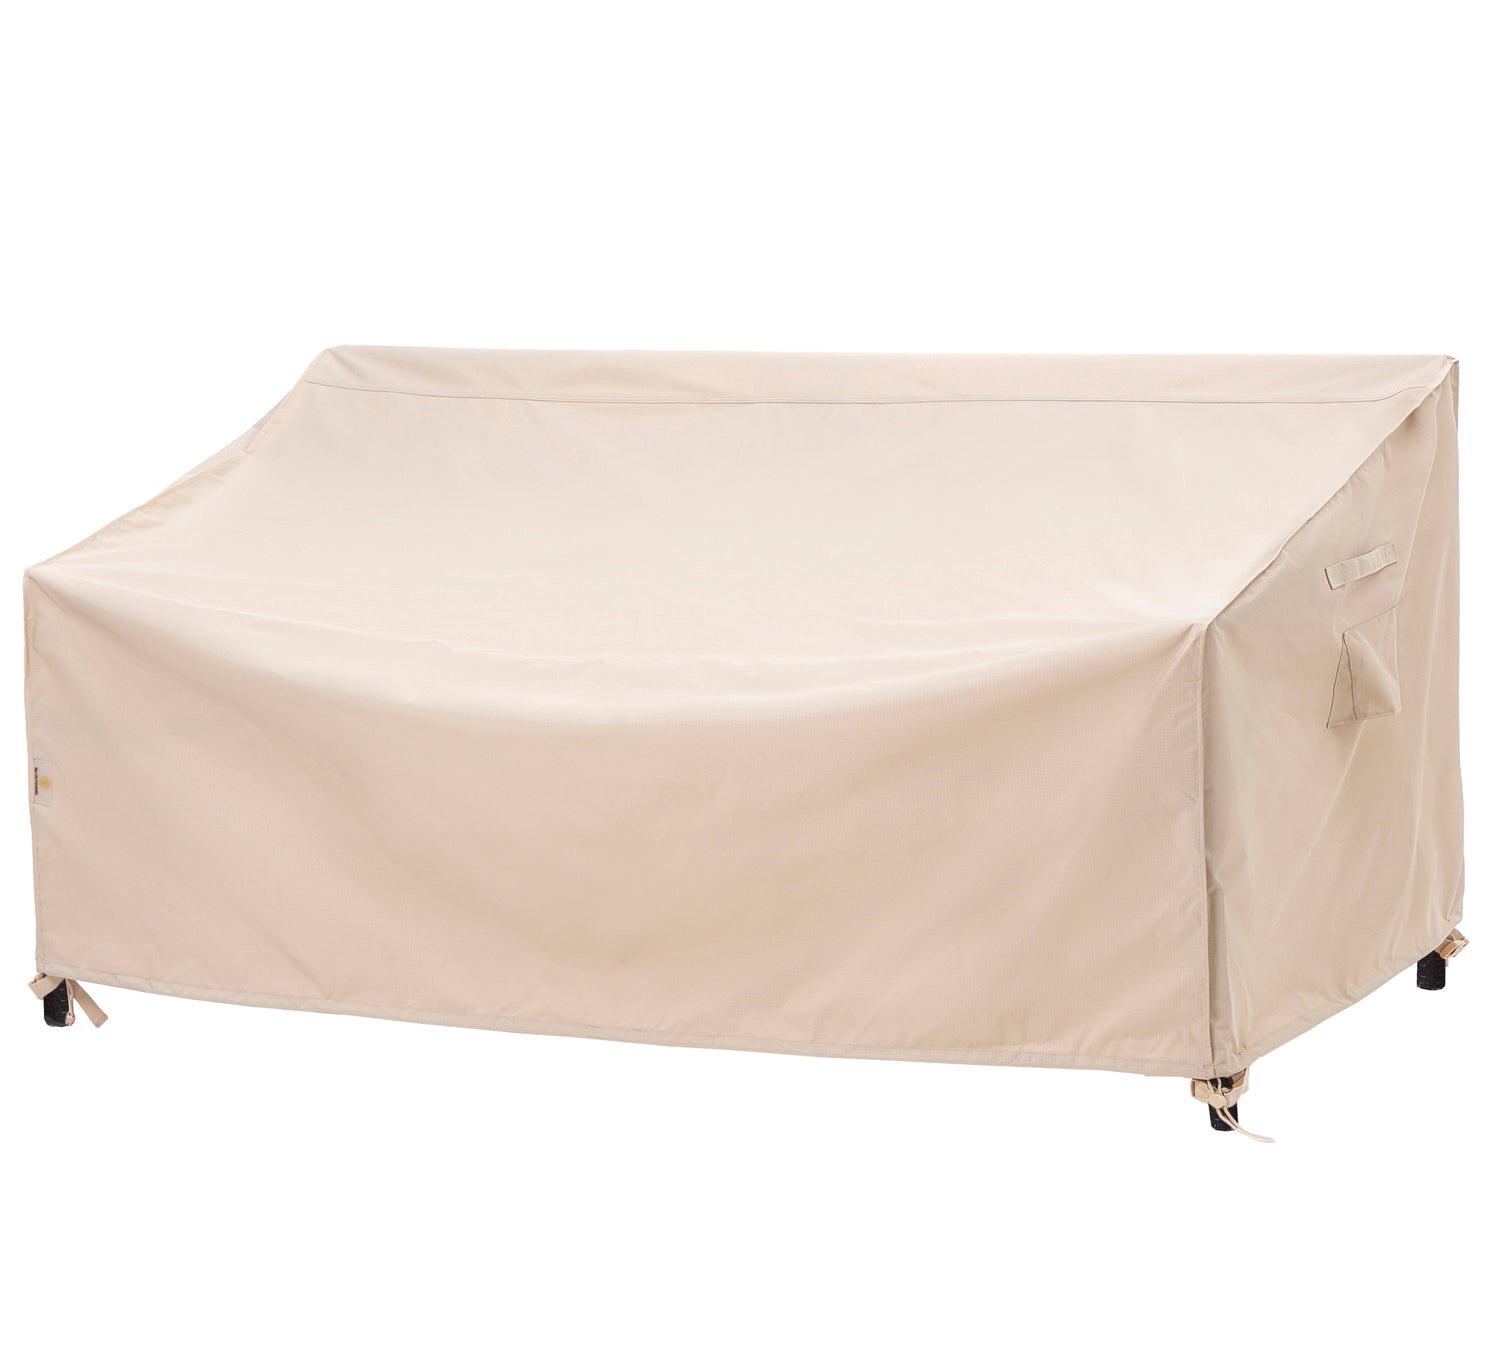 Are Outdoor Furniture Covers Machine Washable? A Quick Guide – F&J Outdoors